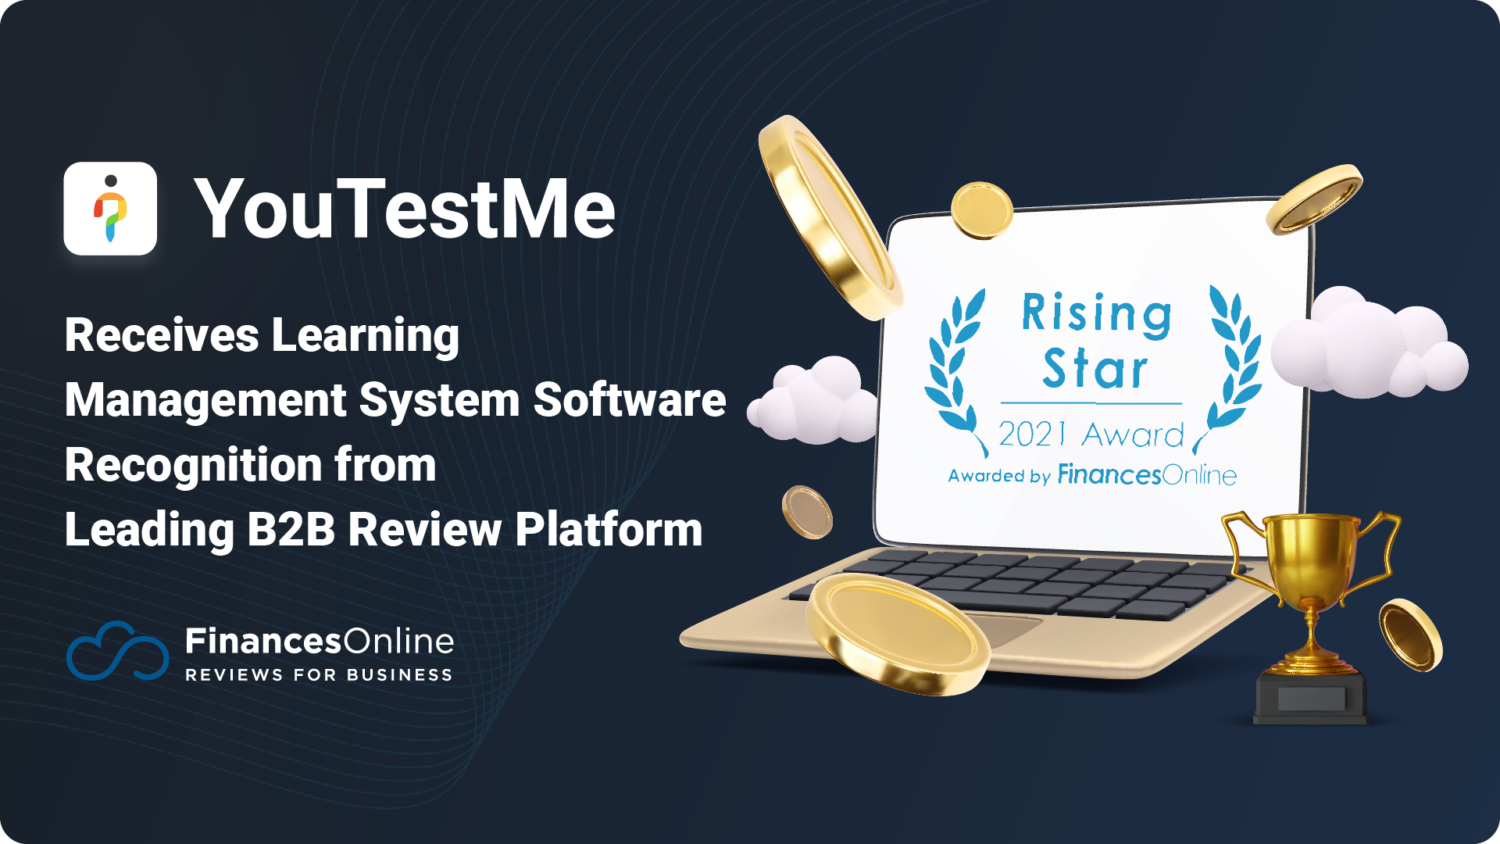 YouTestMe Receives Learning Management System Software Recognition from Leading B2B Review Platform